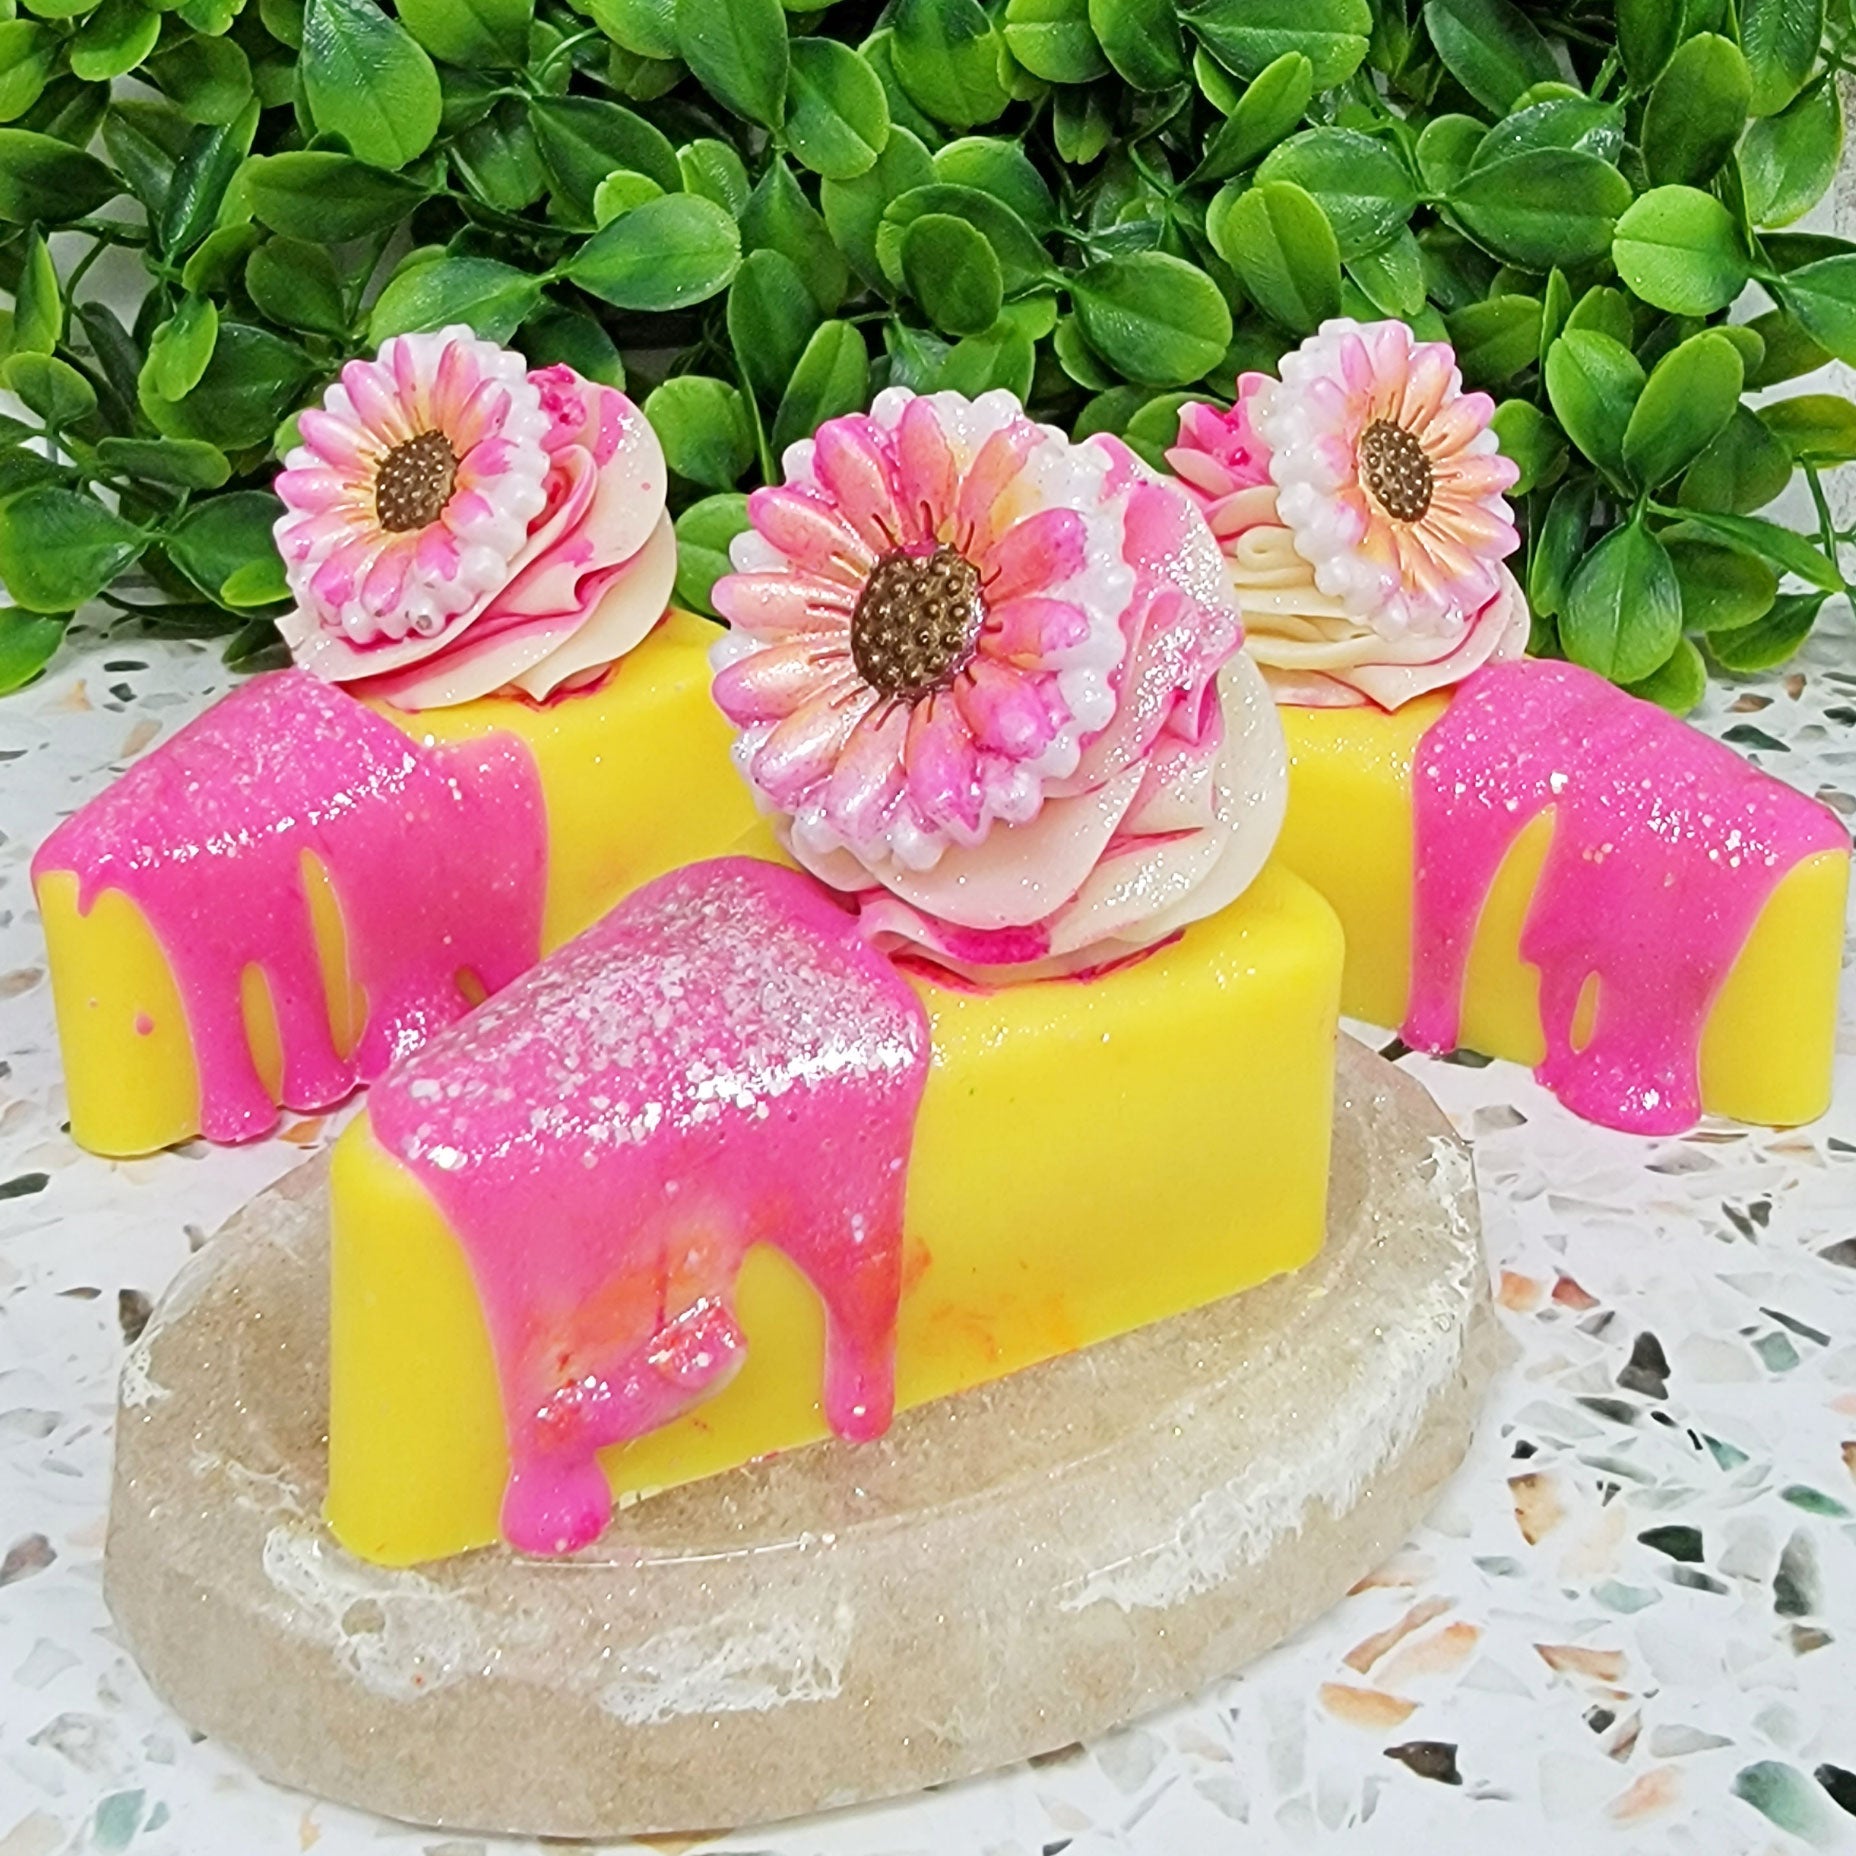 40 Cute First Birthday Cakes in 2022 : Simple Daisy Cake